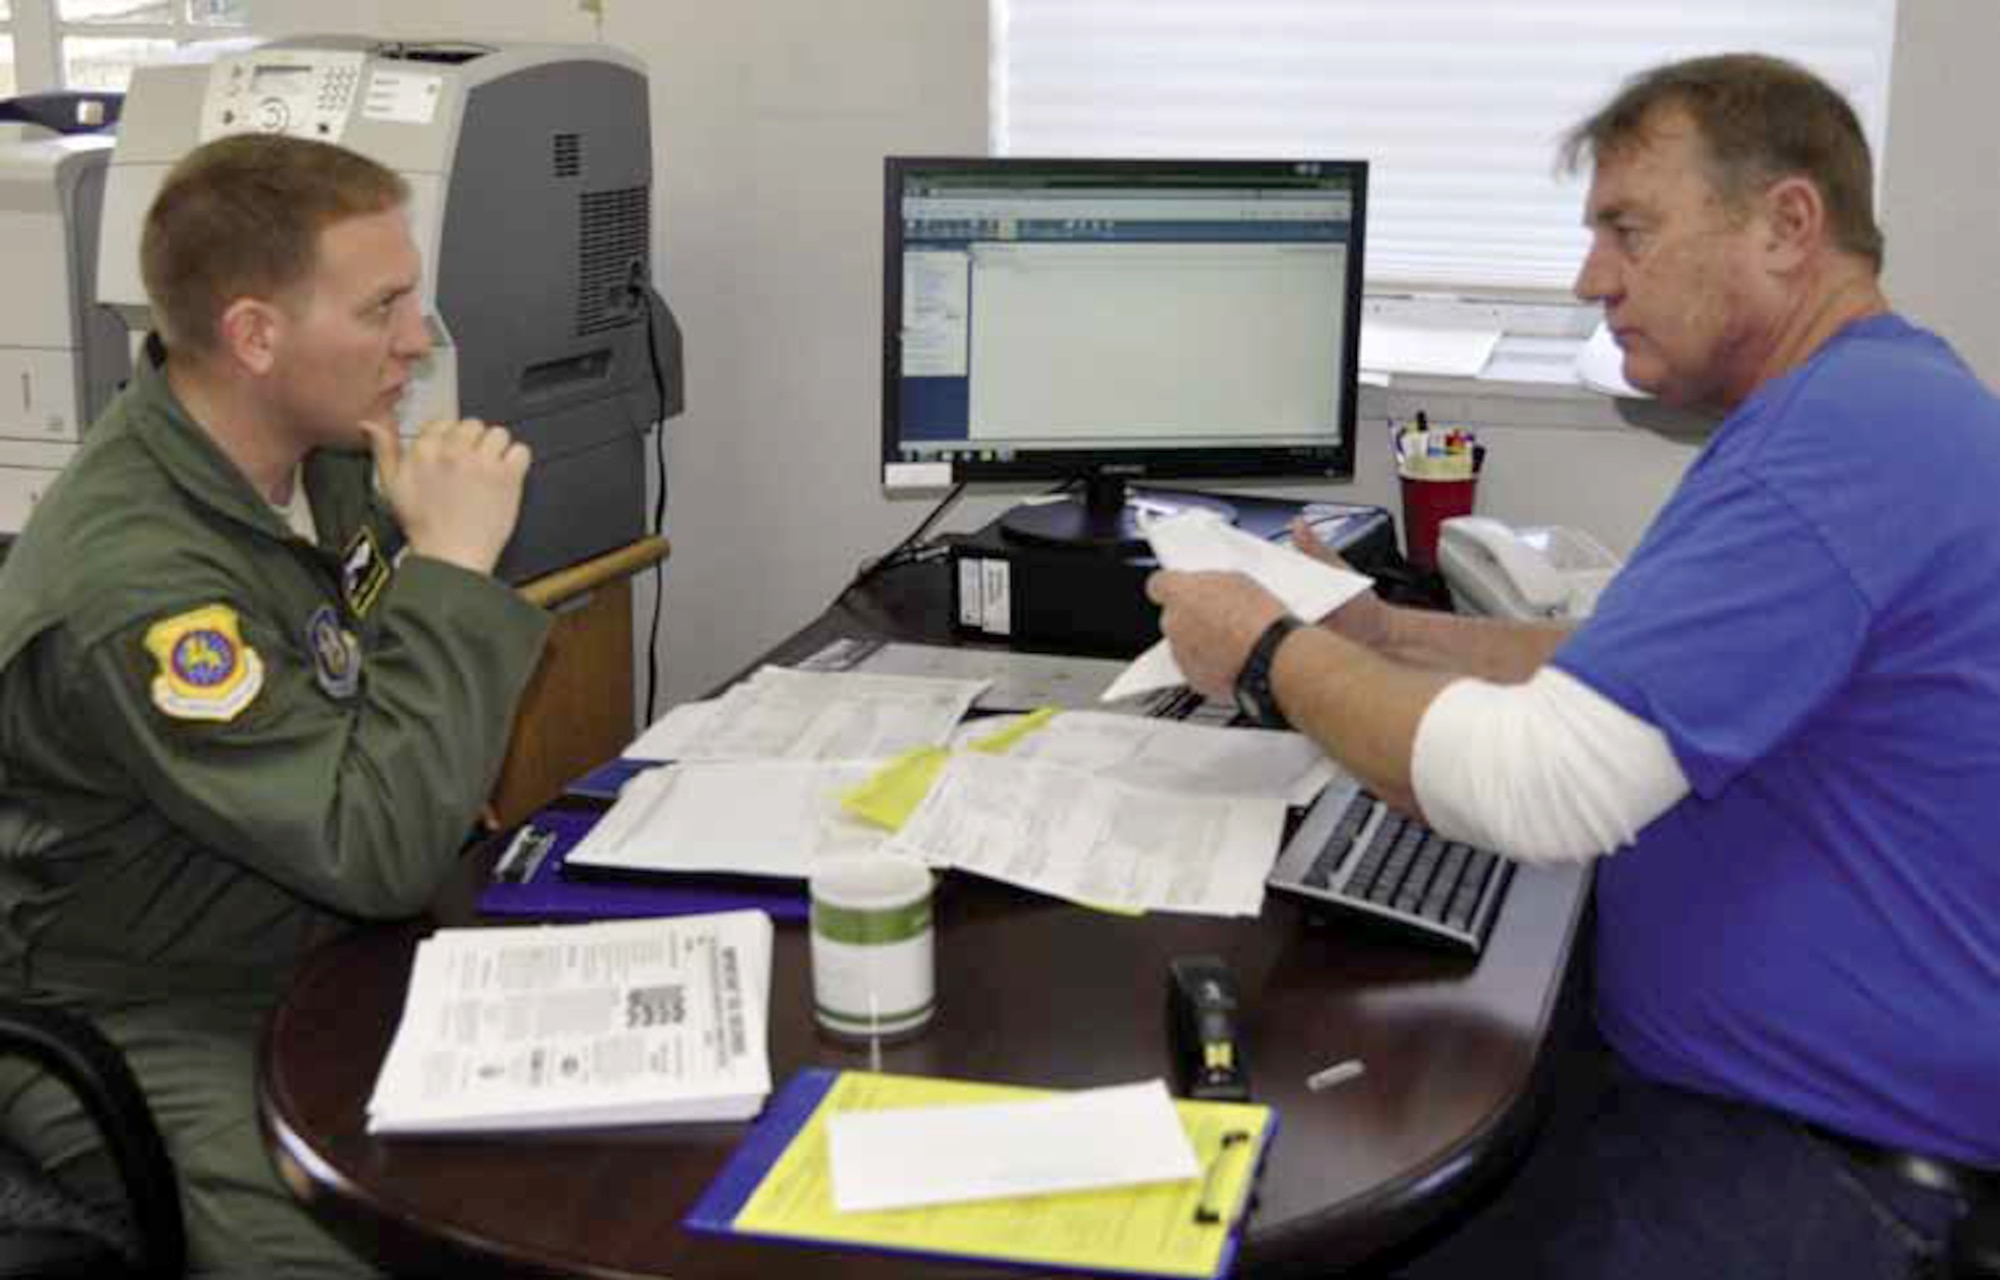 Master Sgt. Chris Schuldes (left), 452d Airlift Control Flight, is seated with Gabriel Verhage, director, Volunteer Income Tax Assistance center, discussing matters involving his 2012 federal and state tax returns, Feb. 14 — this will be the second year in a row that Schuldes has utilized this service. The tax center will process and E-file returns for all March members on appointment or walk-in basis, free of charge. (U.S. Air Force photo by Darnell Gardner)